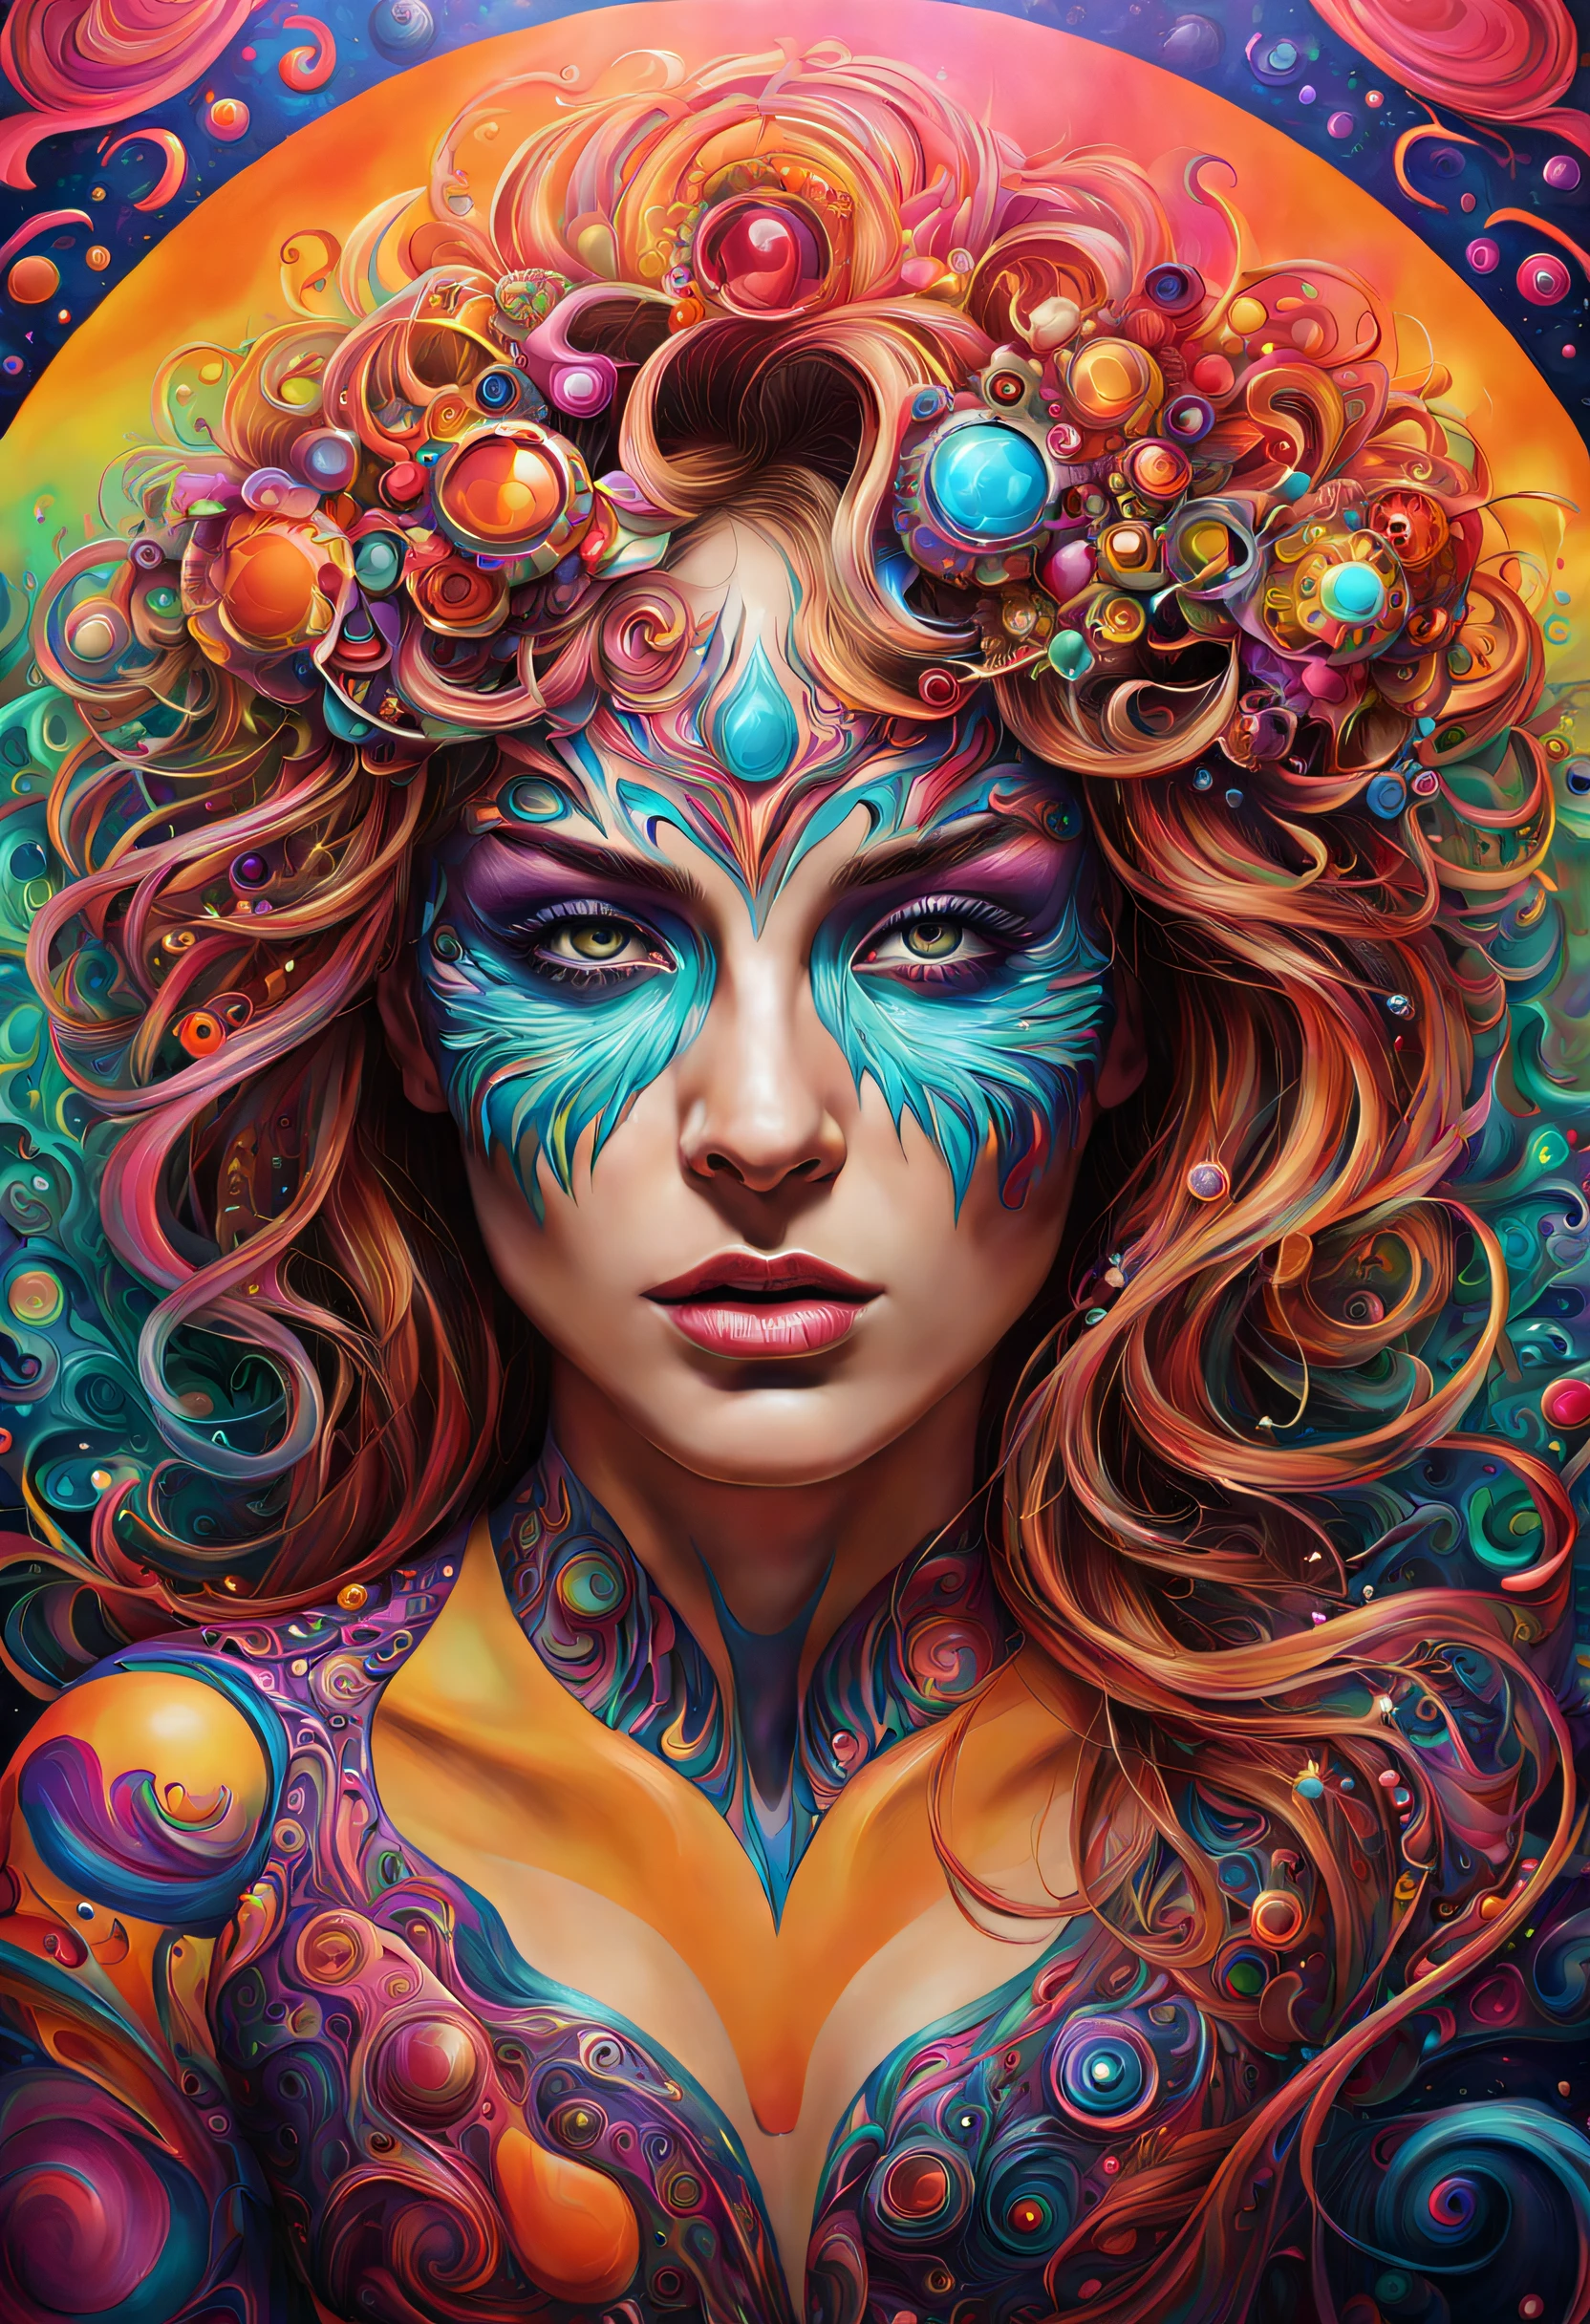 A realy realistic and psychedelic work full of flashy and brilliant color. It's textured and twisted